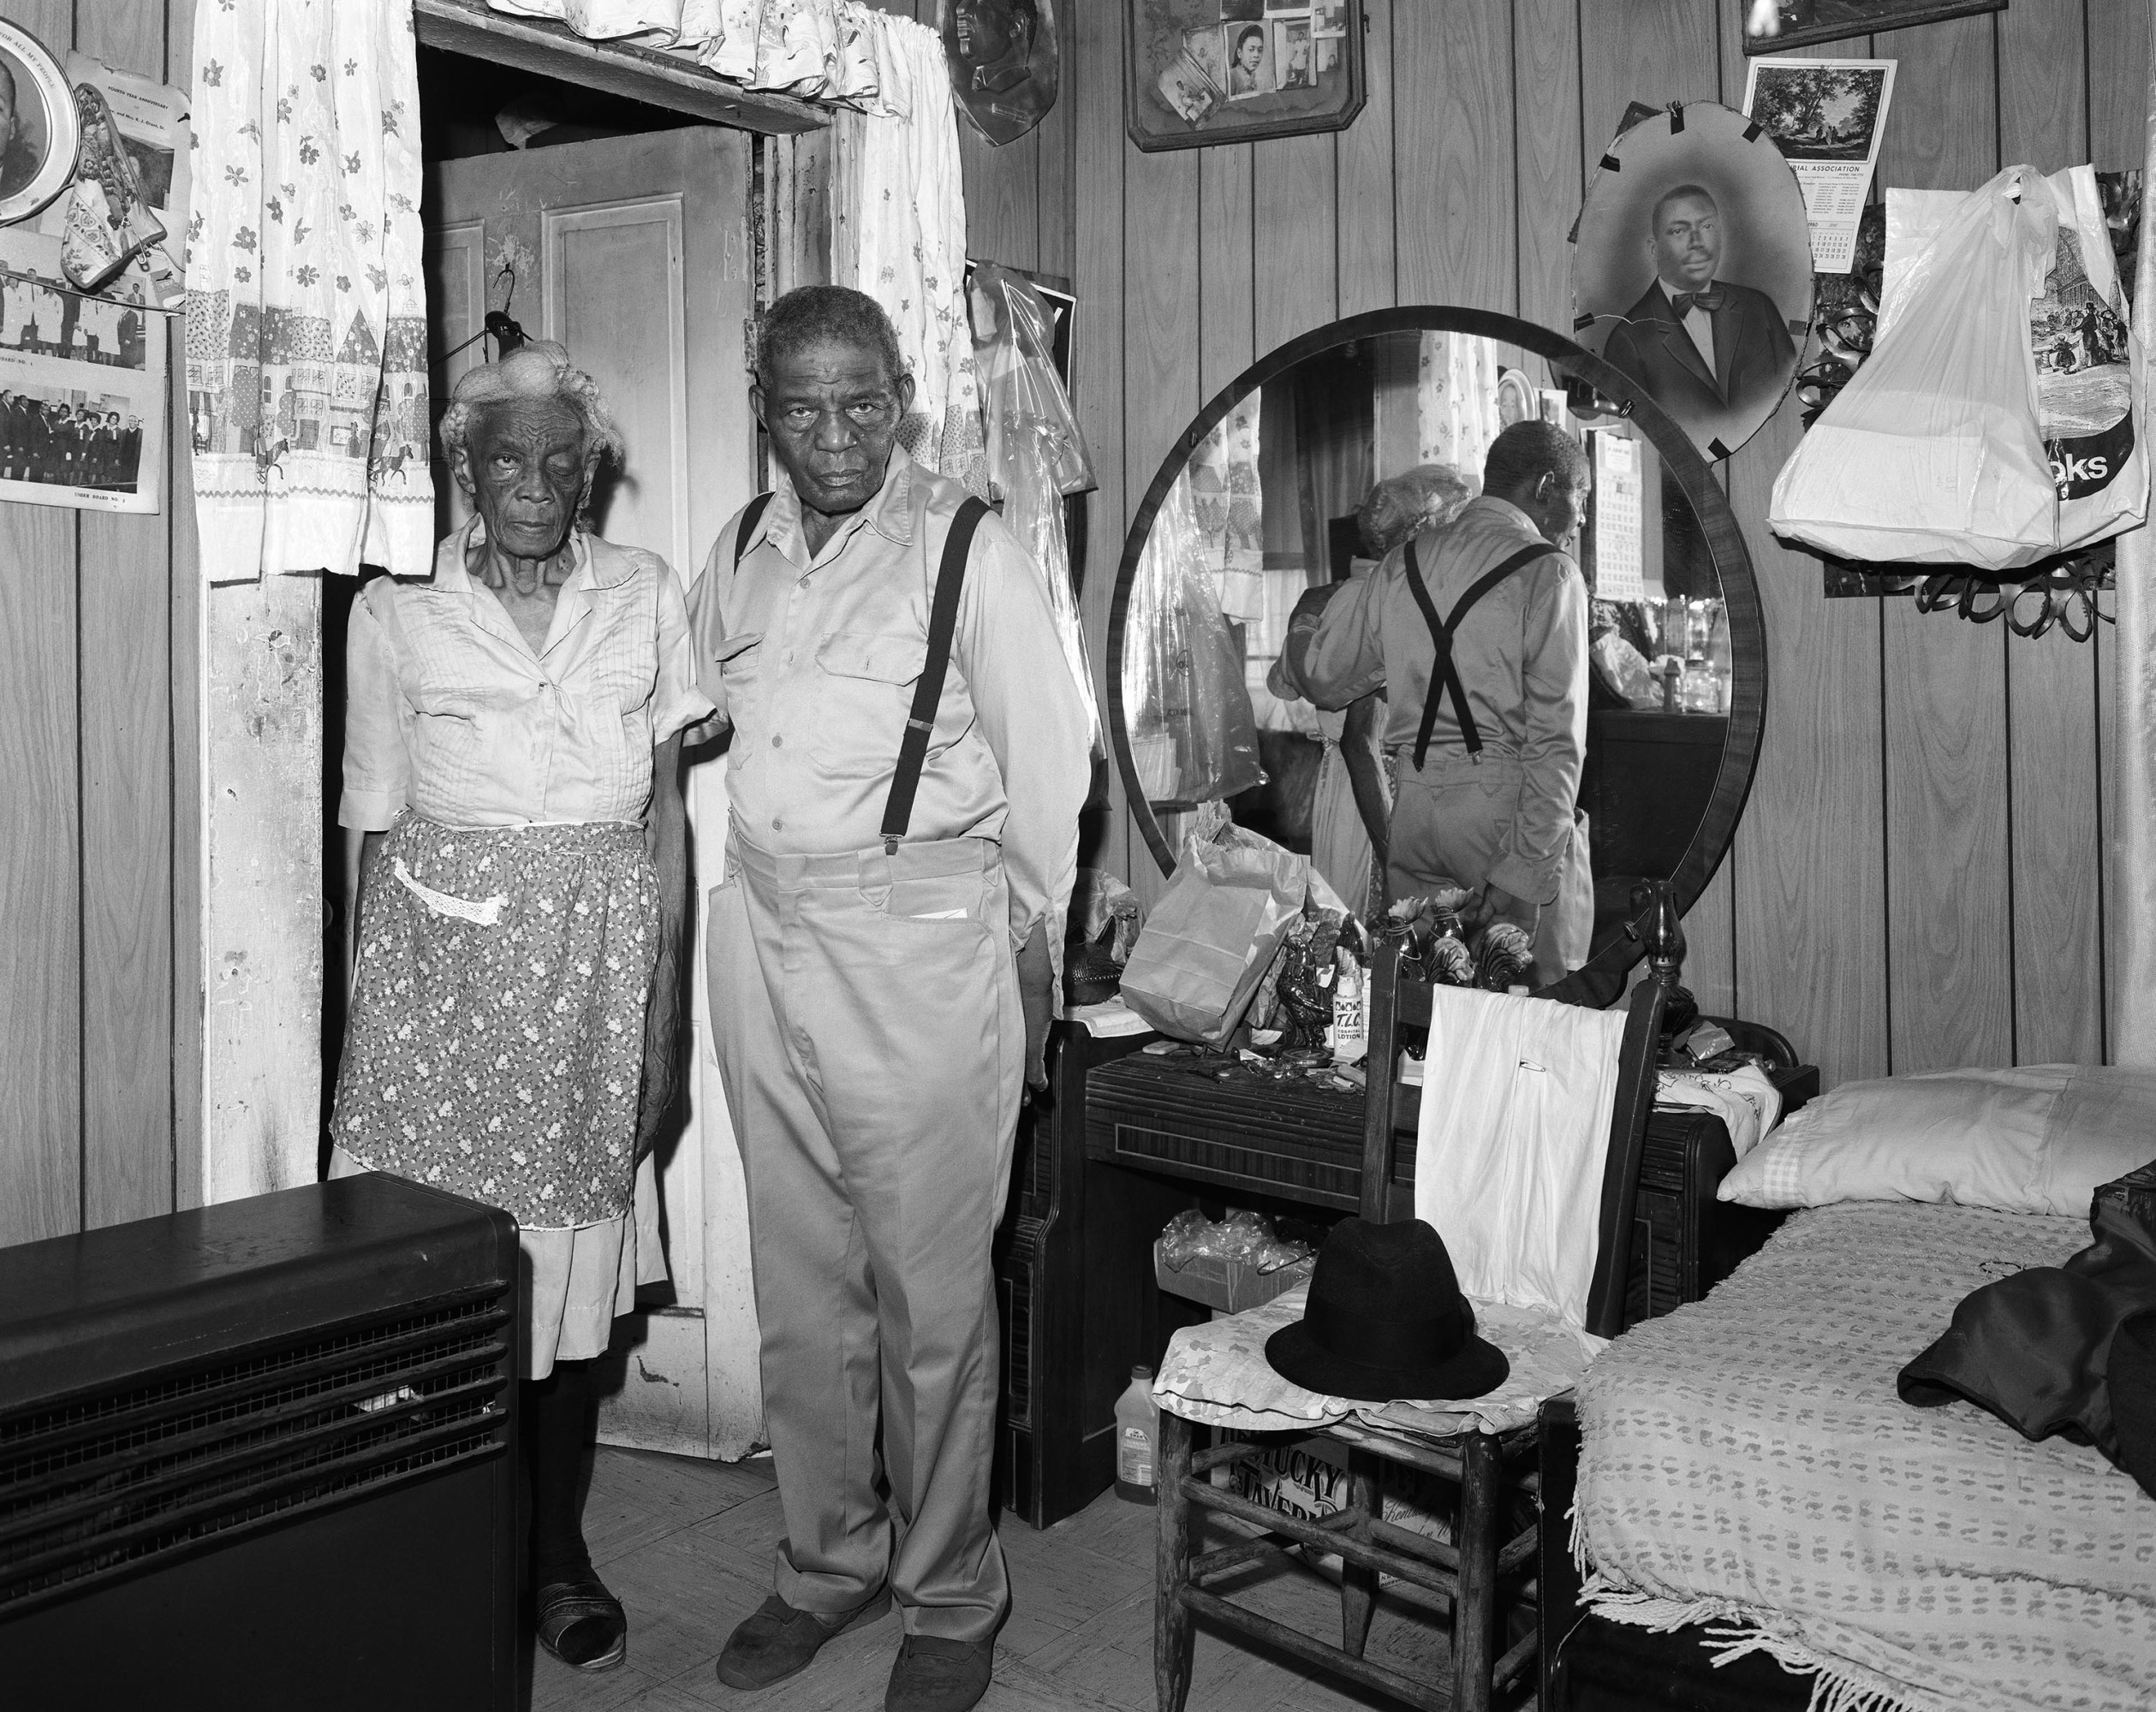 A old man and old woman, who is missing an eye, stand in the doorway of a room with a mirrored dresser, family photos, and a chair.